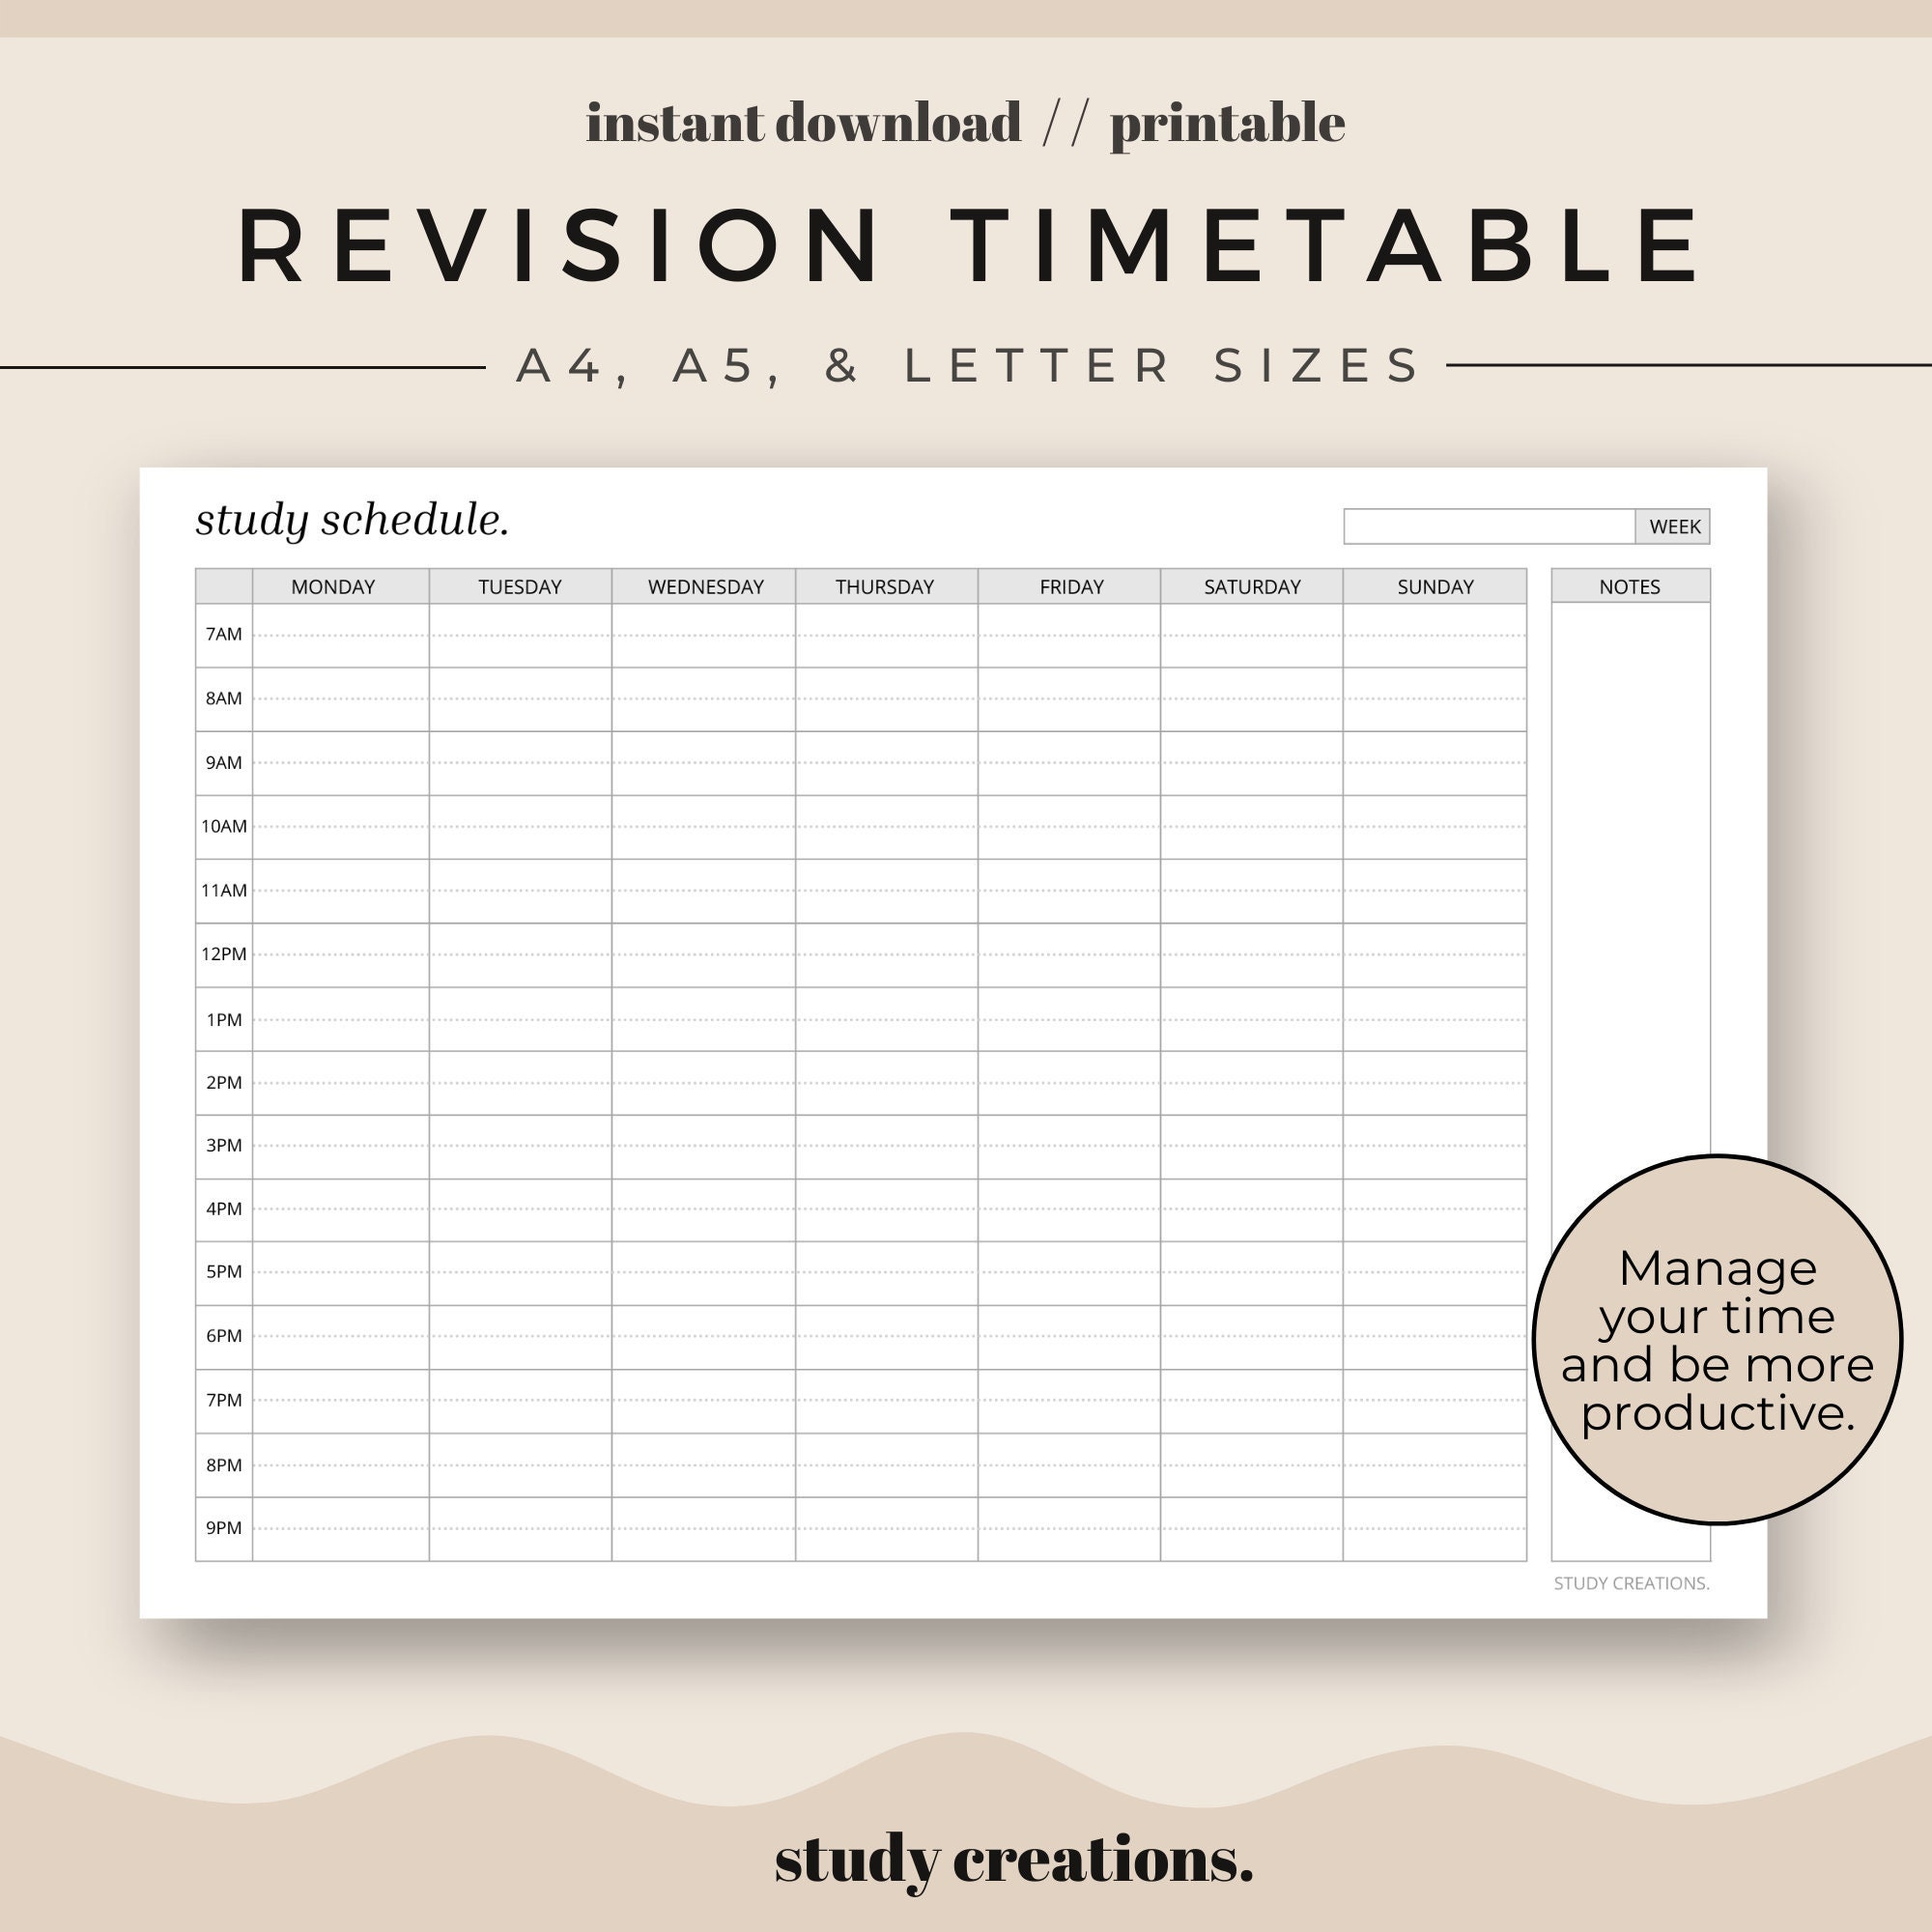 Revision Timetable Printable Set Study Schedule Weekly Timetable Hourly